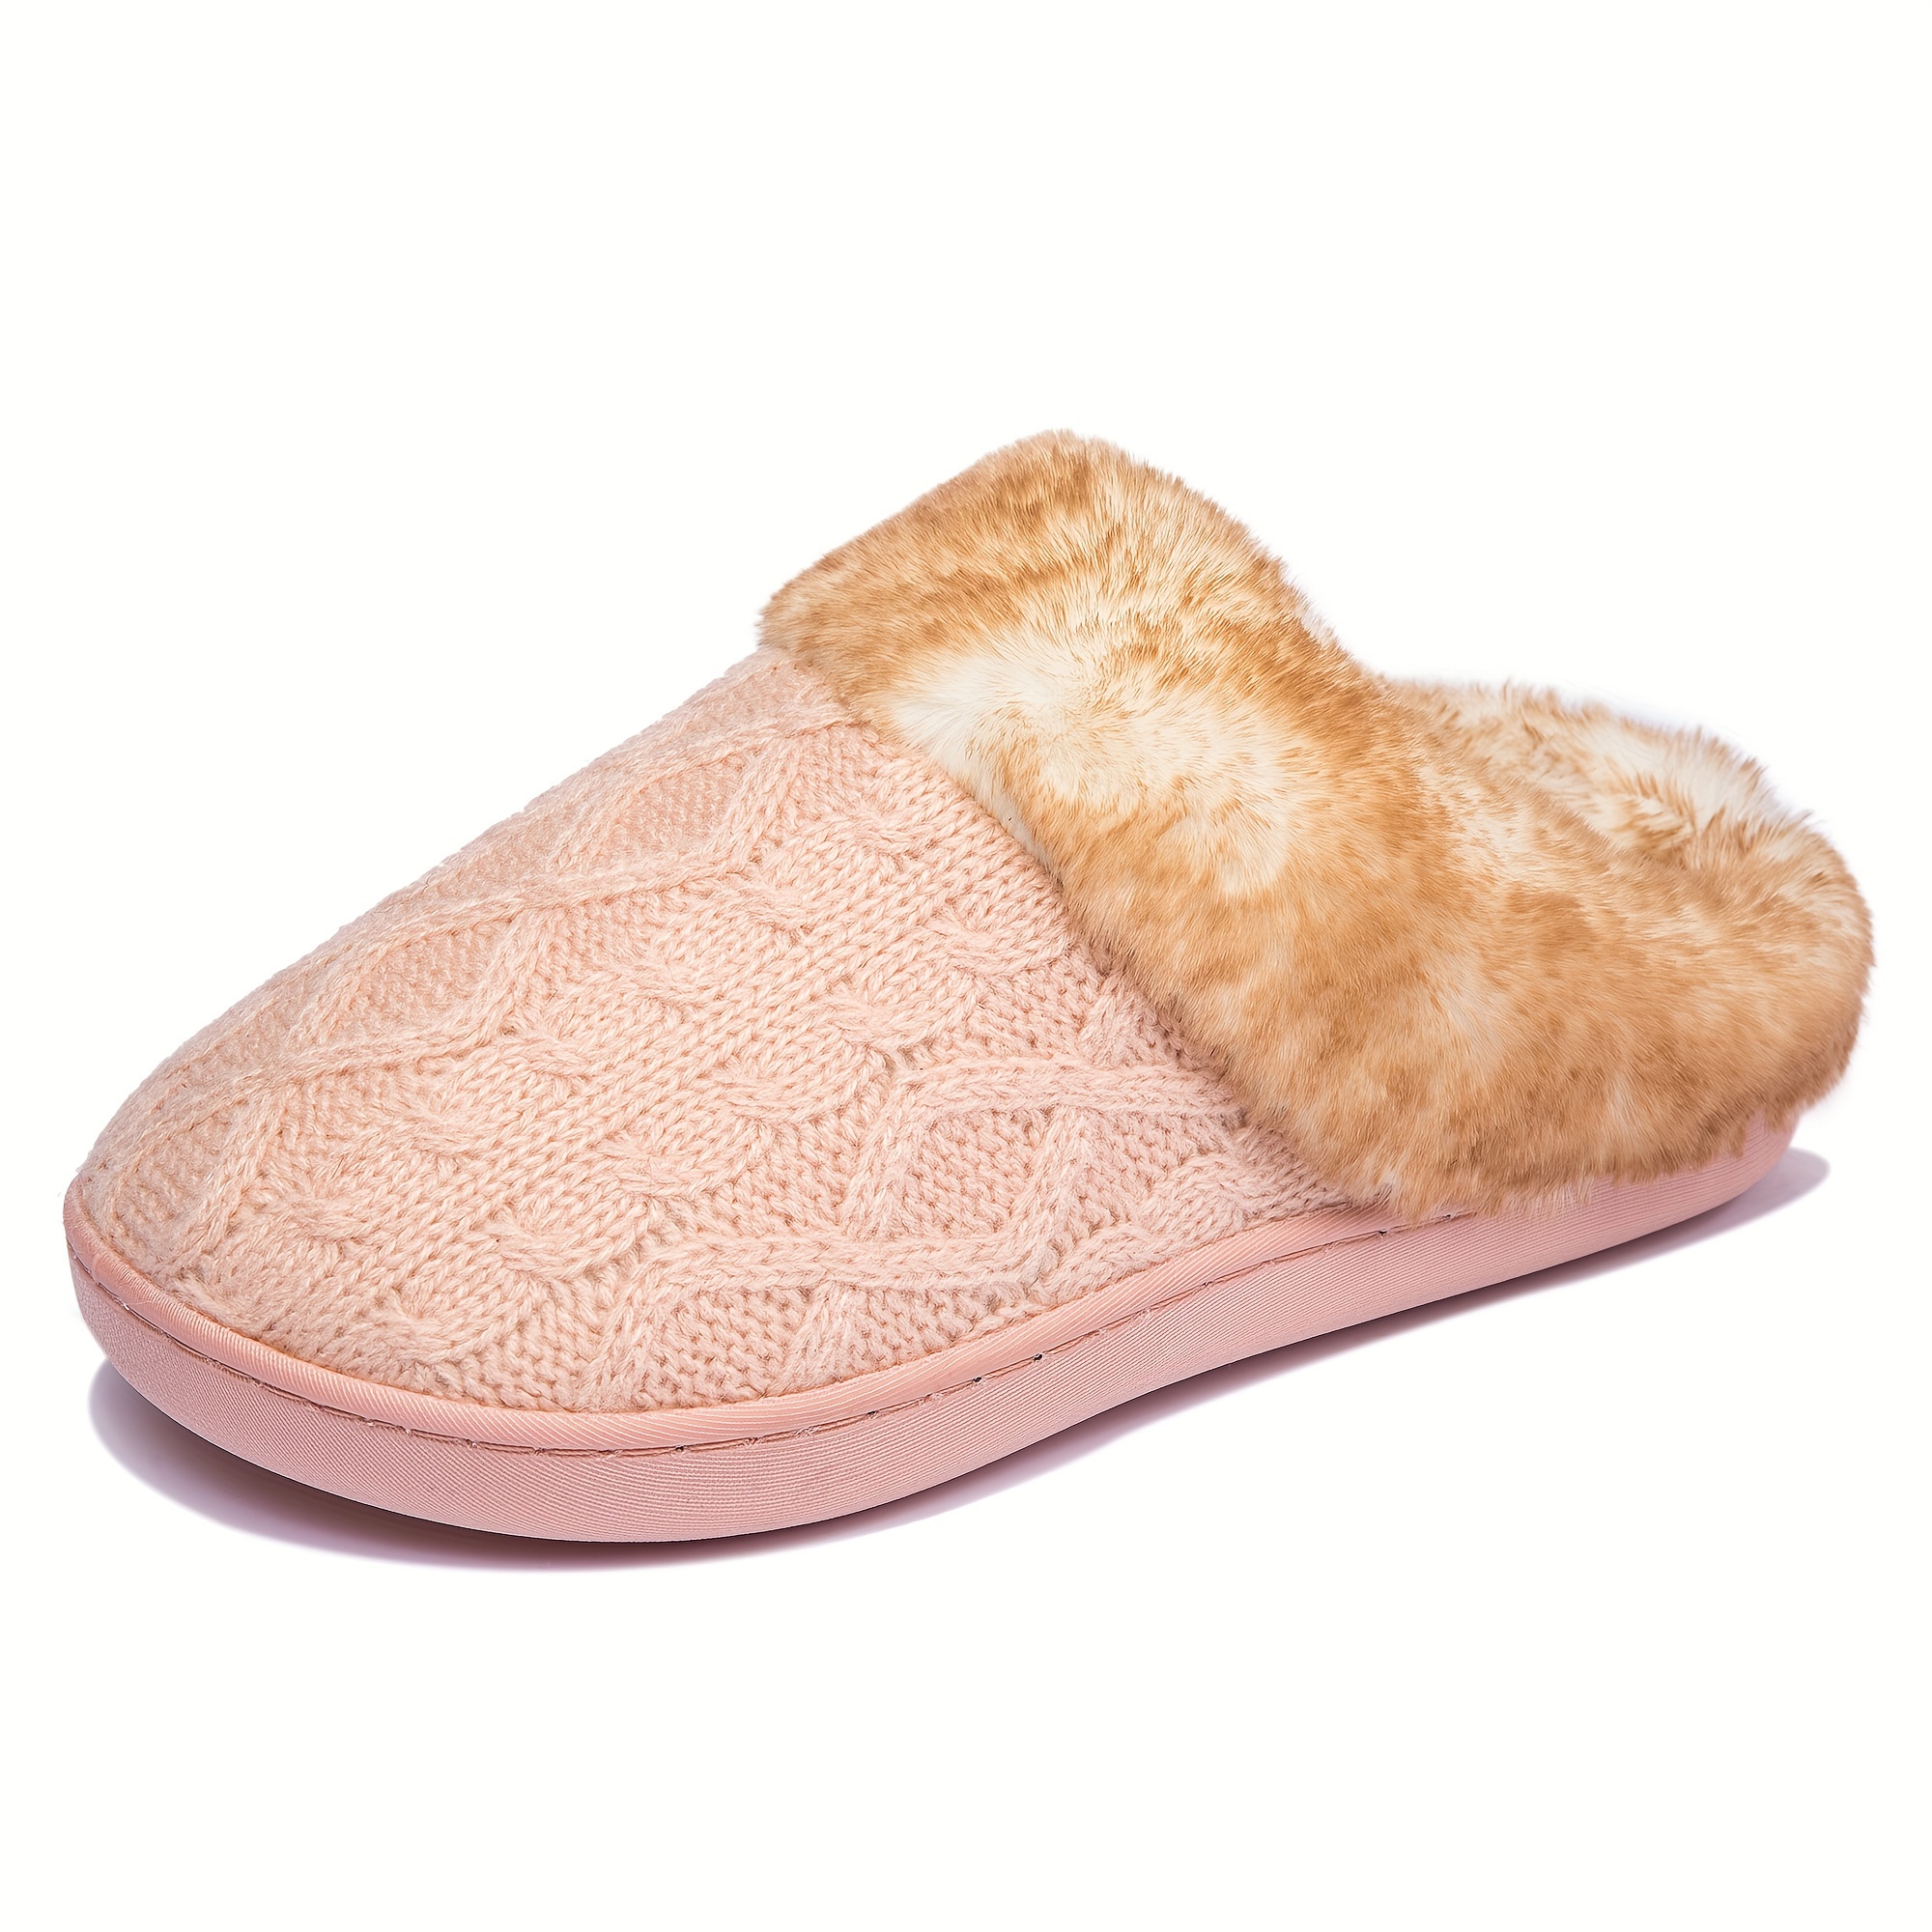 home slippers winter furry plush lined closed toe soft sole